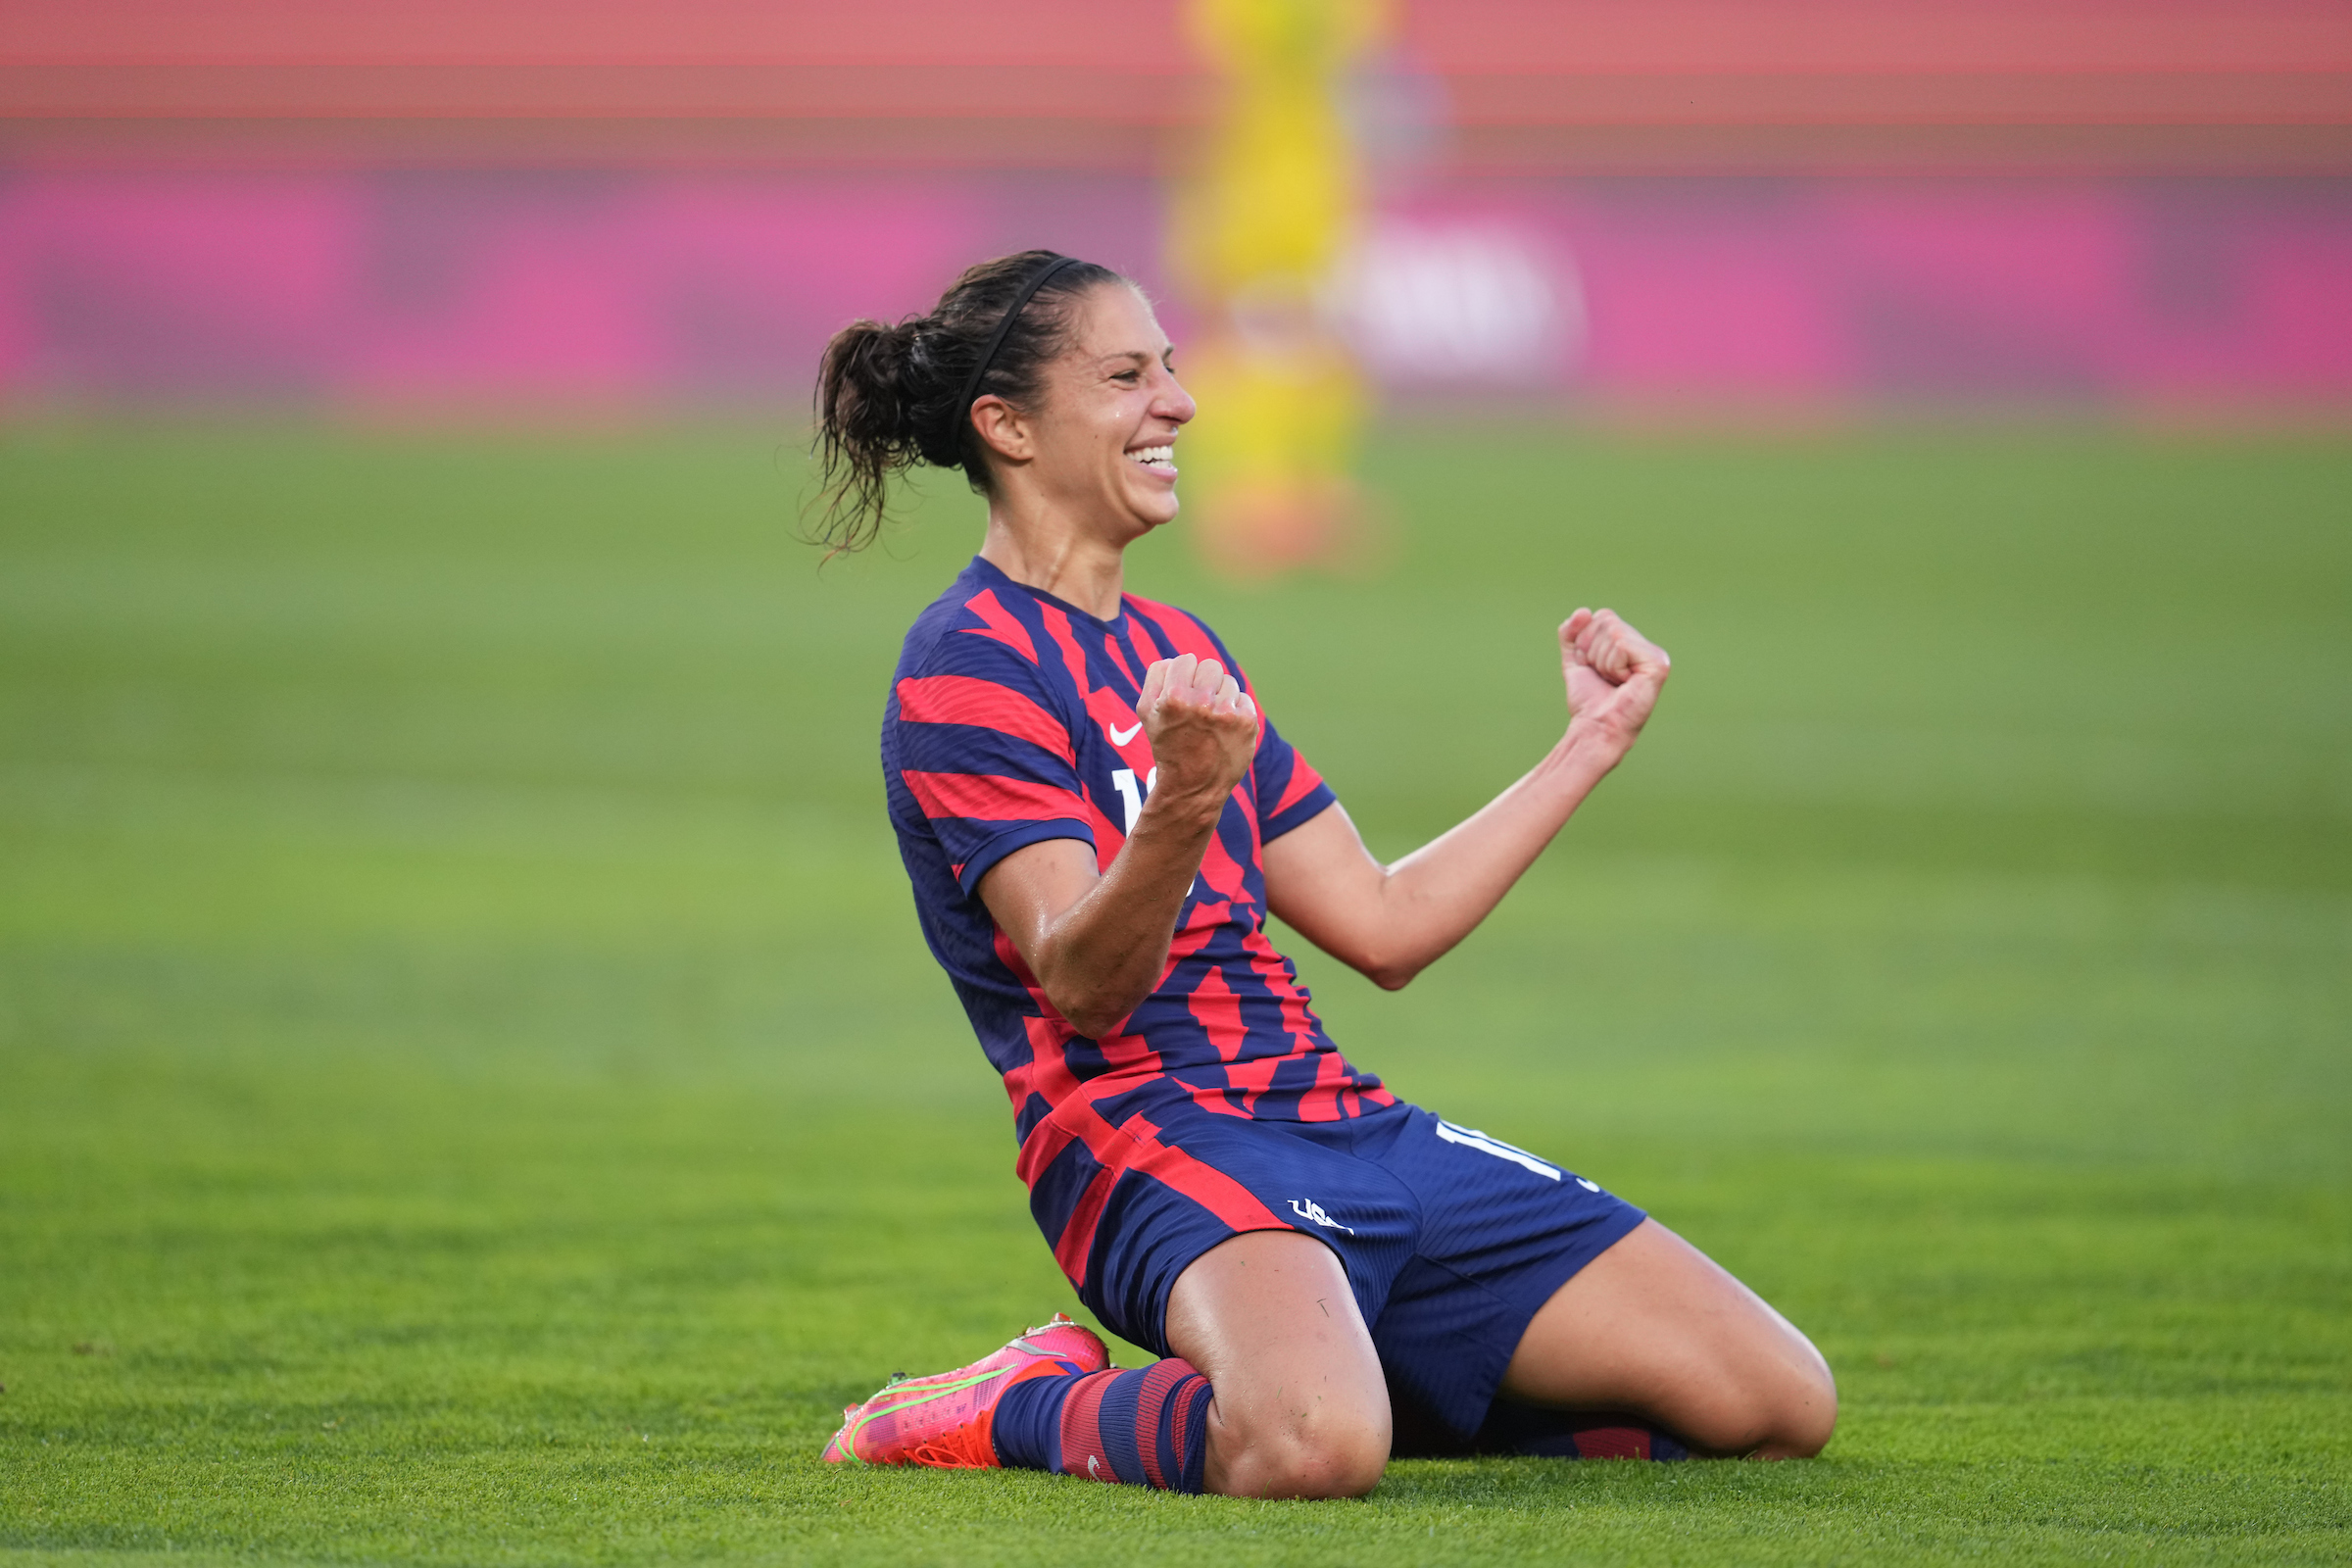 Who is US soccer star Carli Lloyd and what is her net worth?